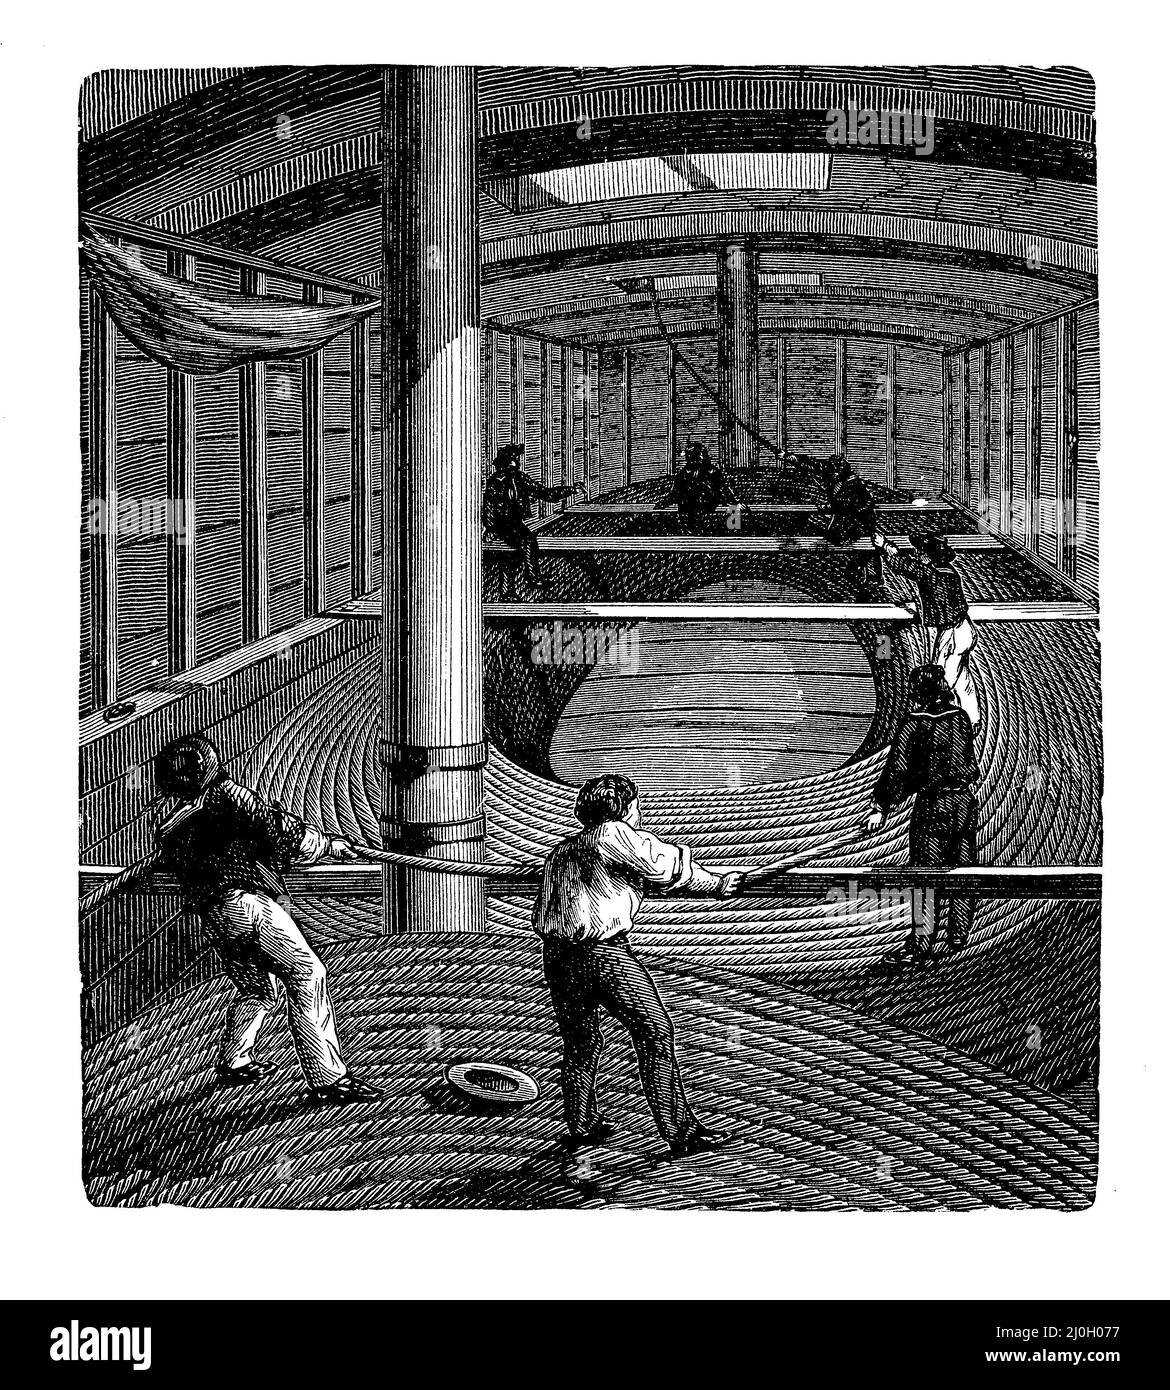 Sailors at work to put in storage long ropes into the freight hold, 19th century illustration Stock Photo